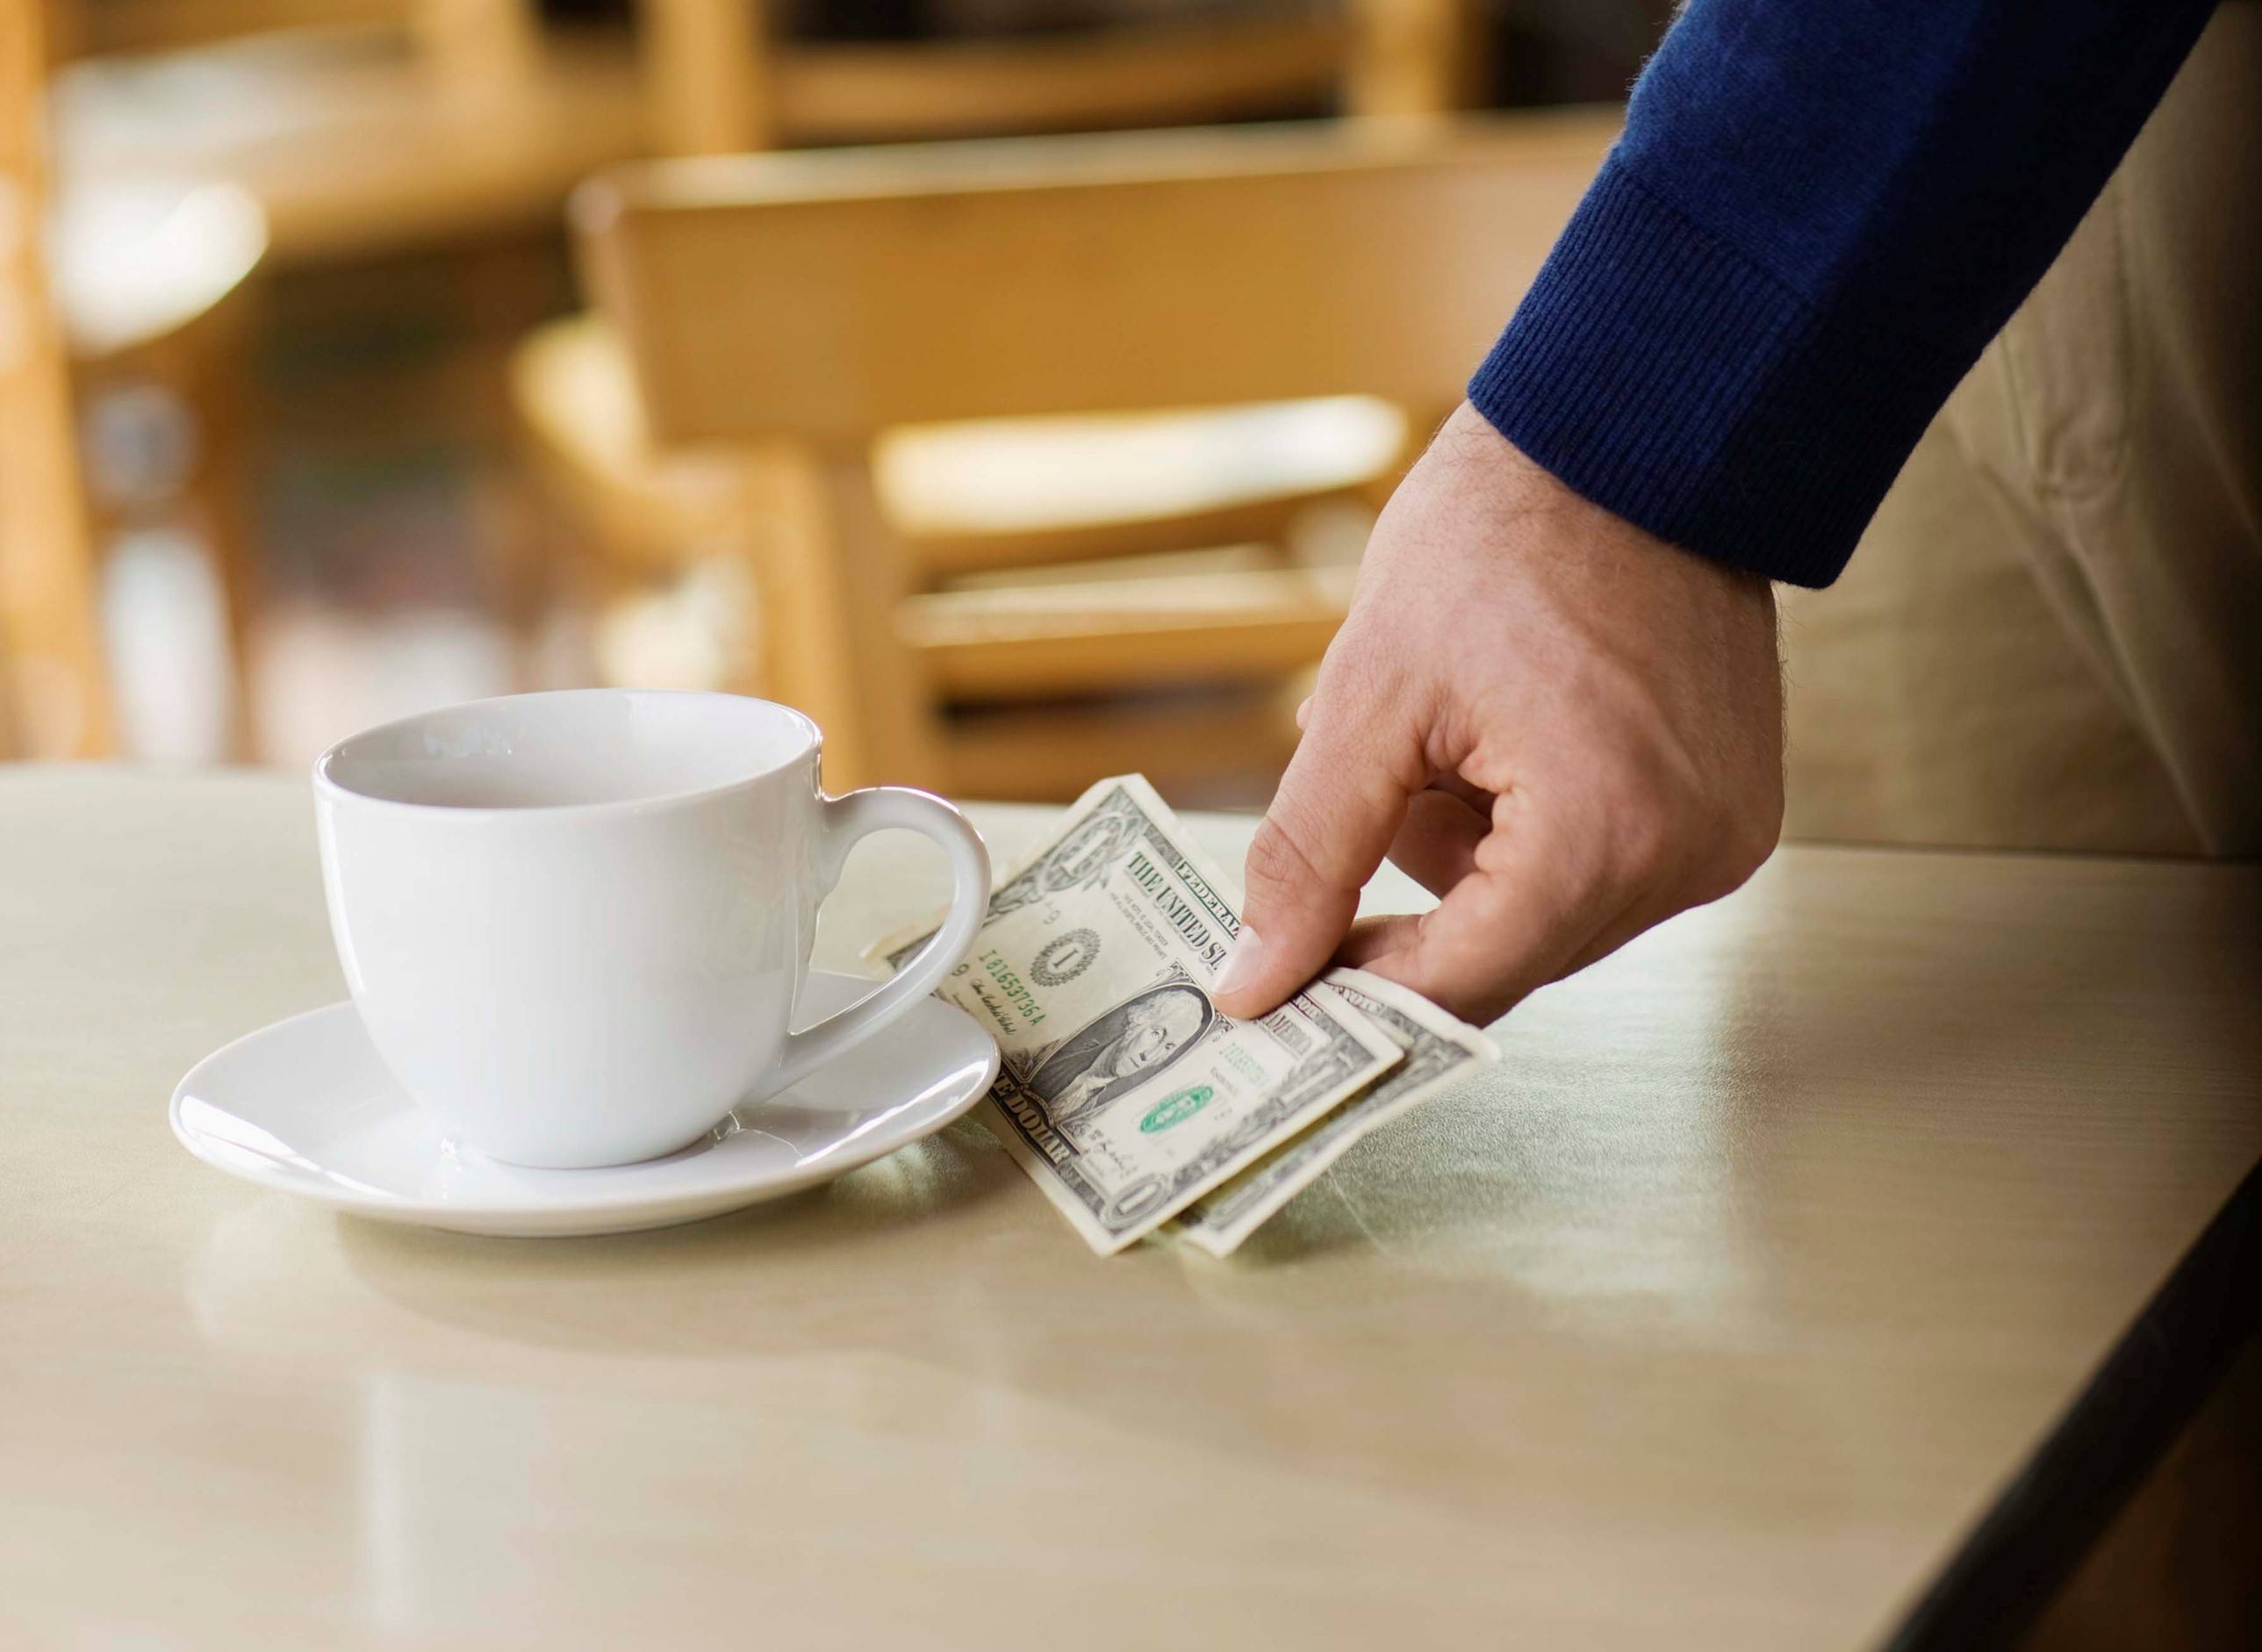 Man leaving tip on table at cafe